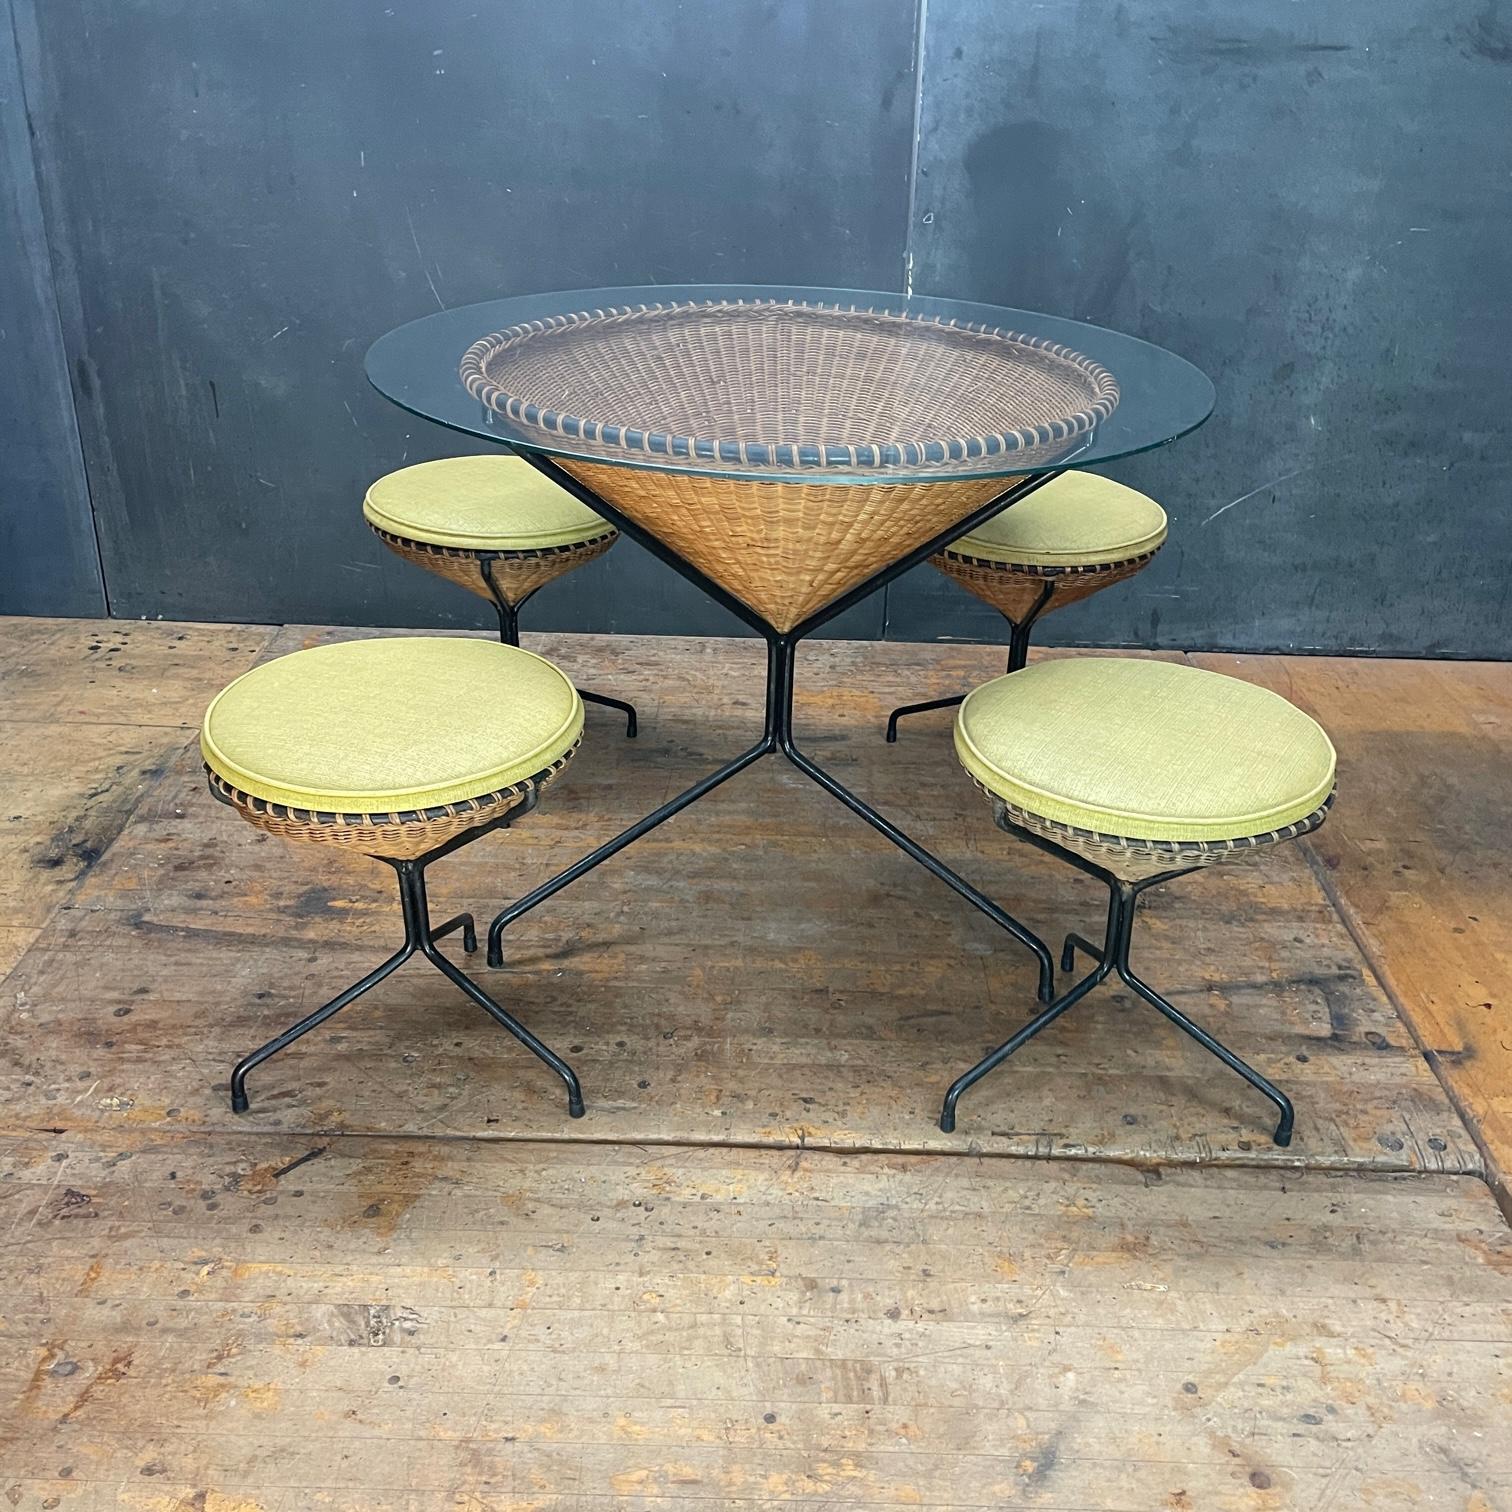 American 1950s California Design Danny Ho Fong Wicker Iron Tiki Dining Table Stool Set For Sale